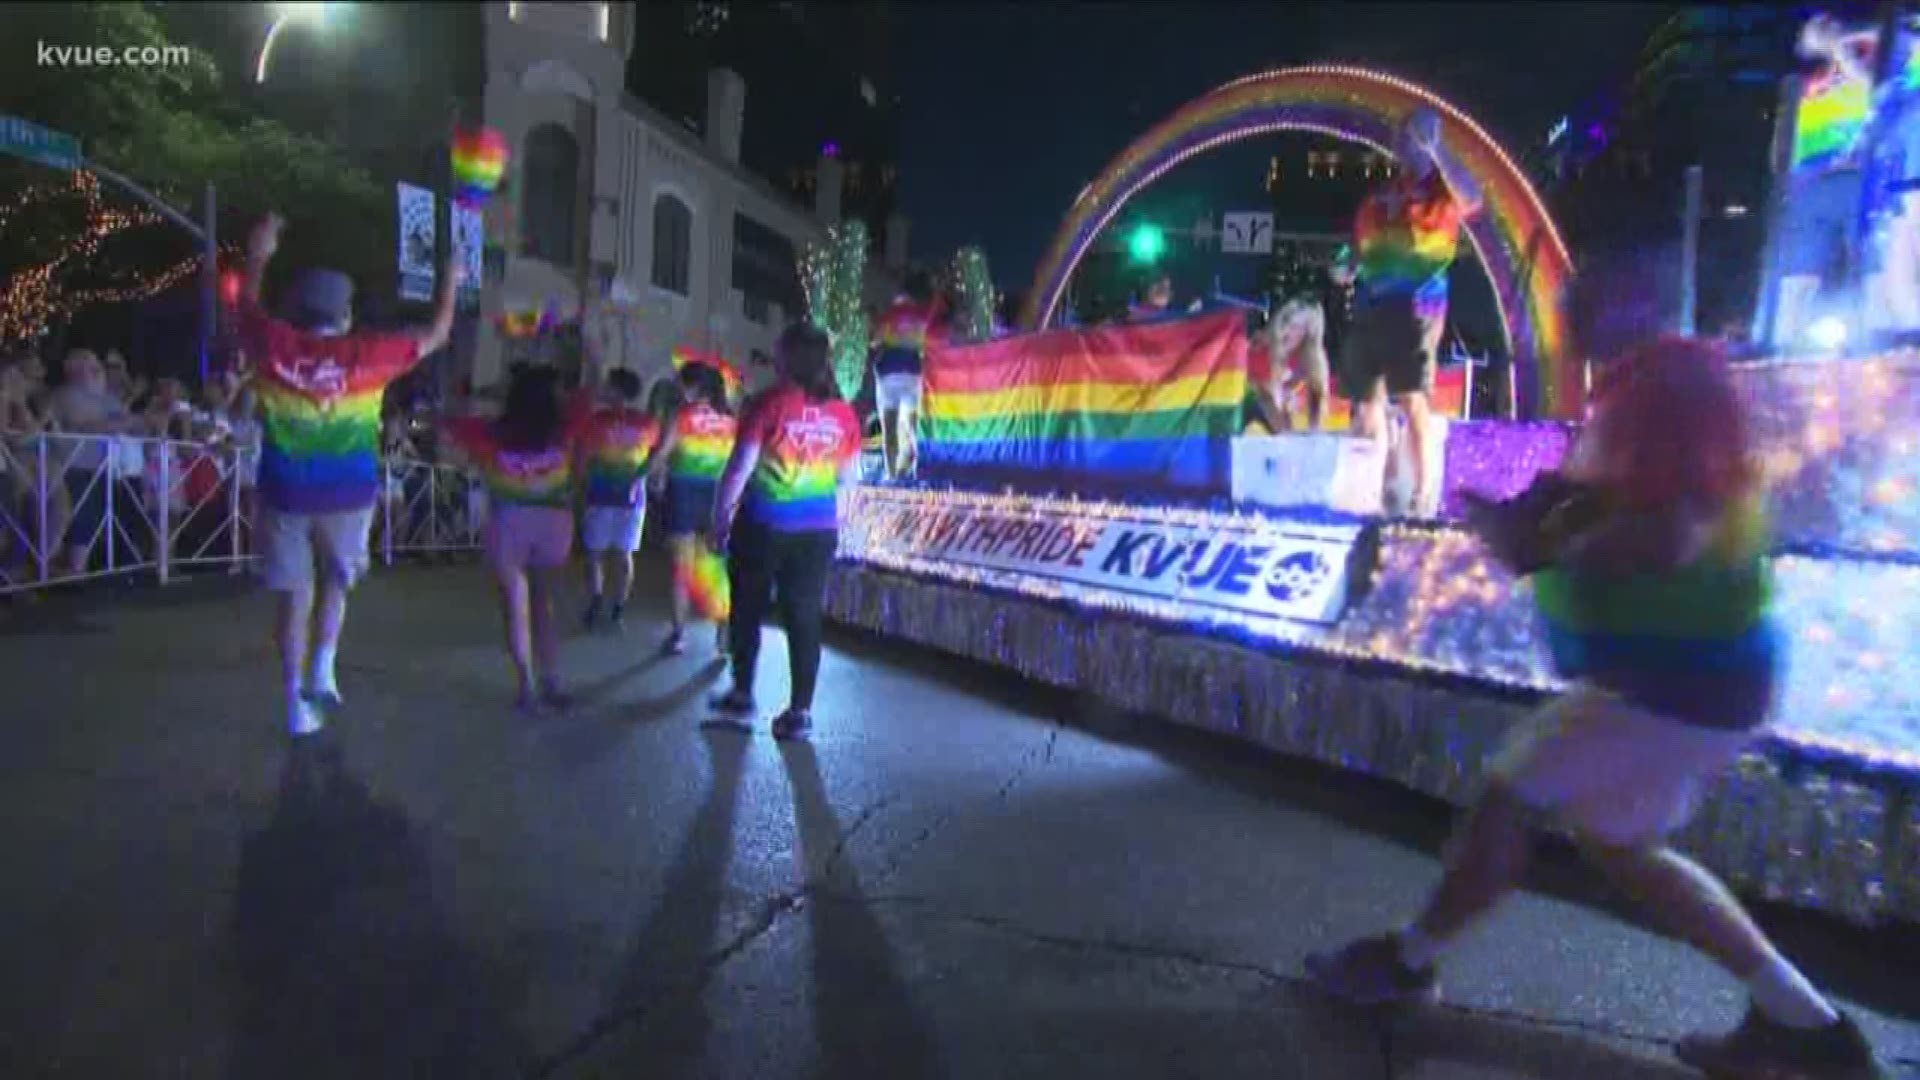 Austin Pride is a chance for people to come together and spread some love.